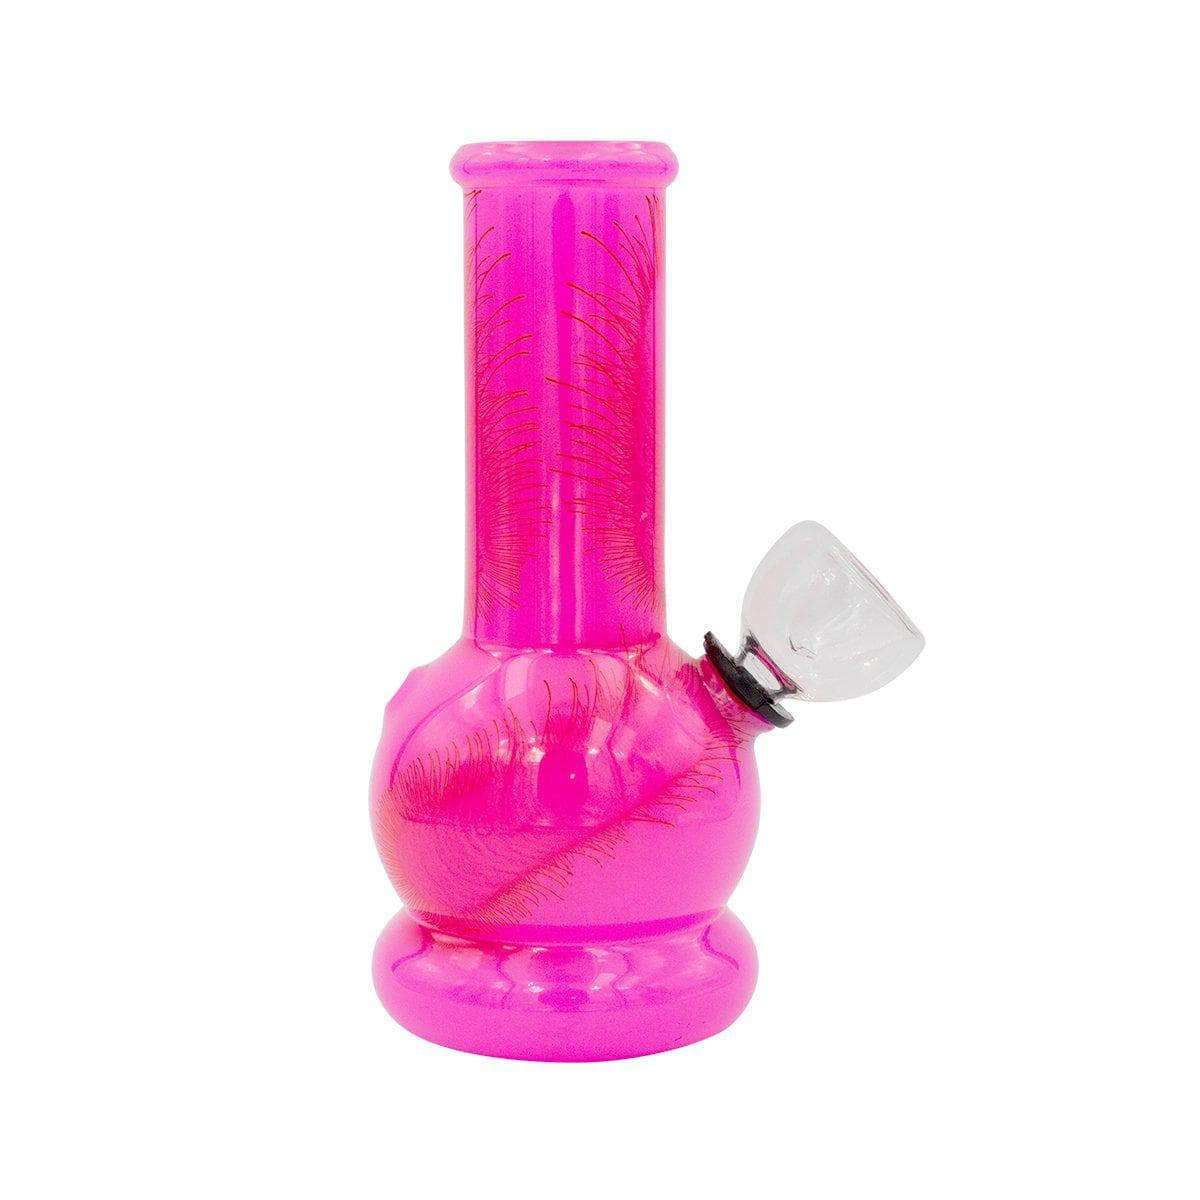 5-inch glass carbed bong smoking device swirl frosted pink Eukaryote nucleus science molecule design two-layers base